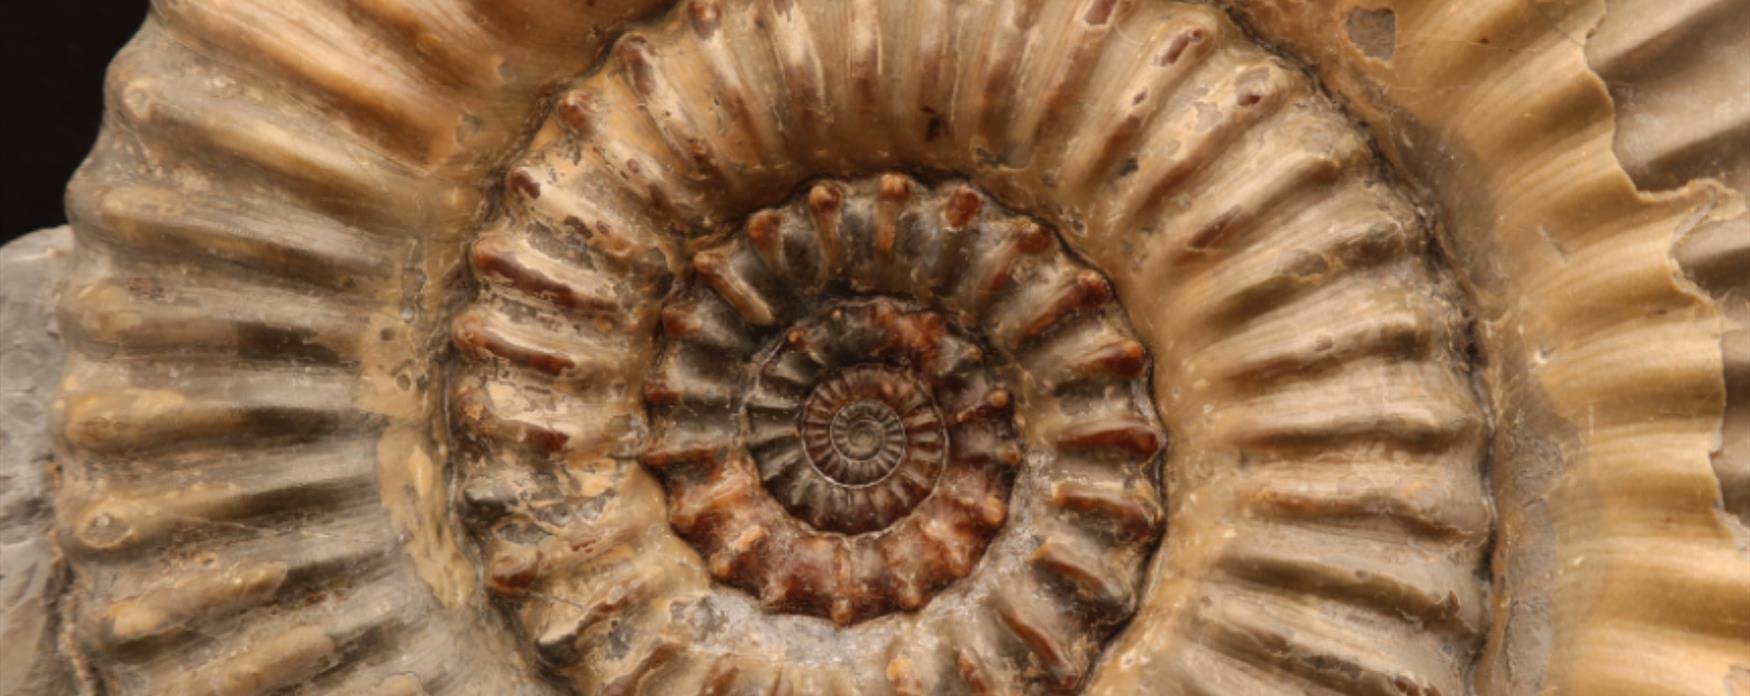 A Xipheroceras ammonite from Charmouth, Dorset